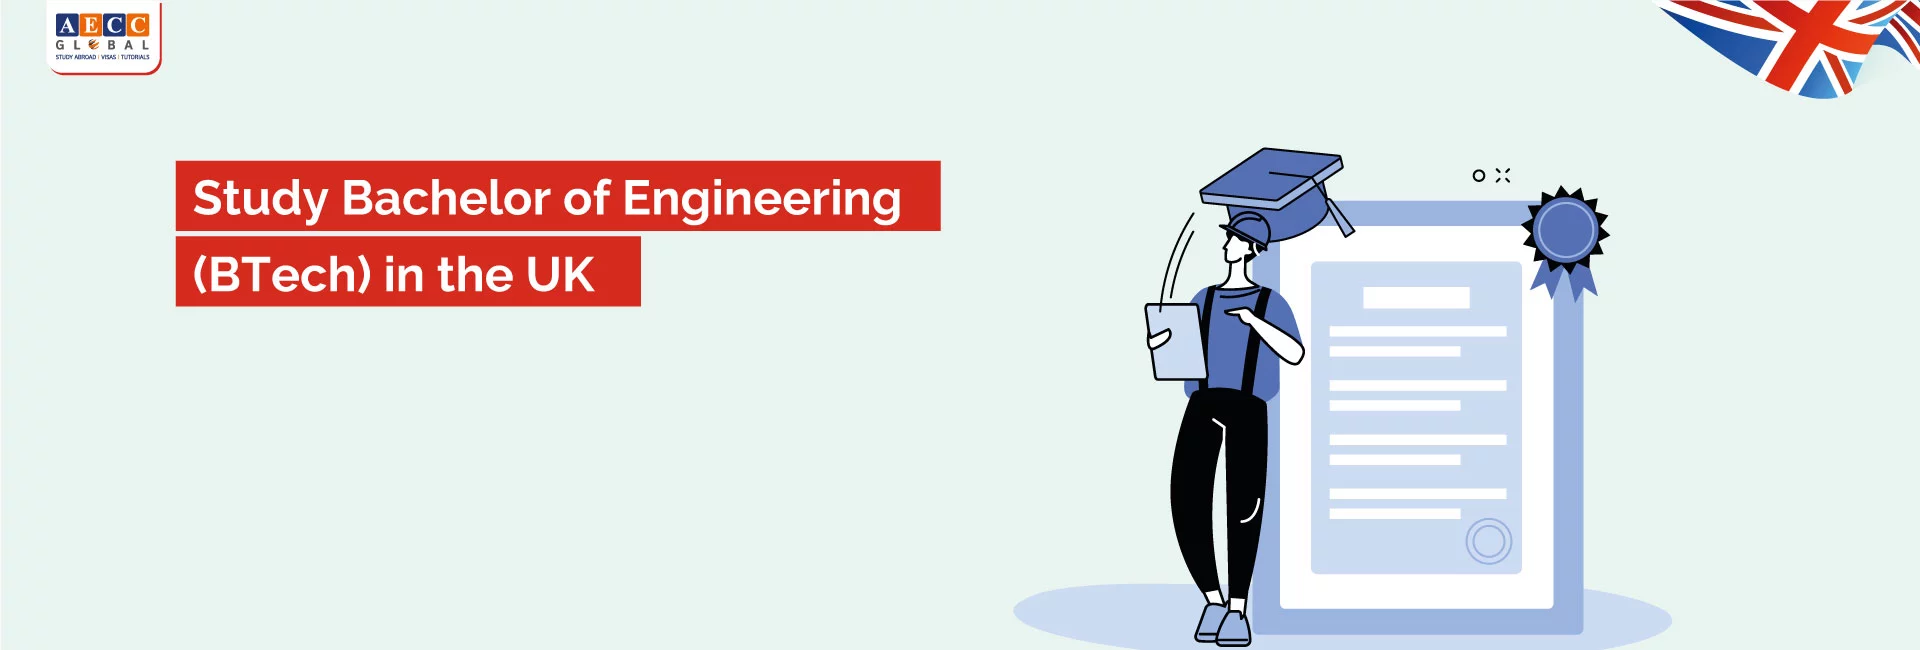 Study Bachelors of Engineering (BTech) in the UK